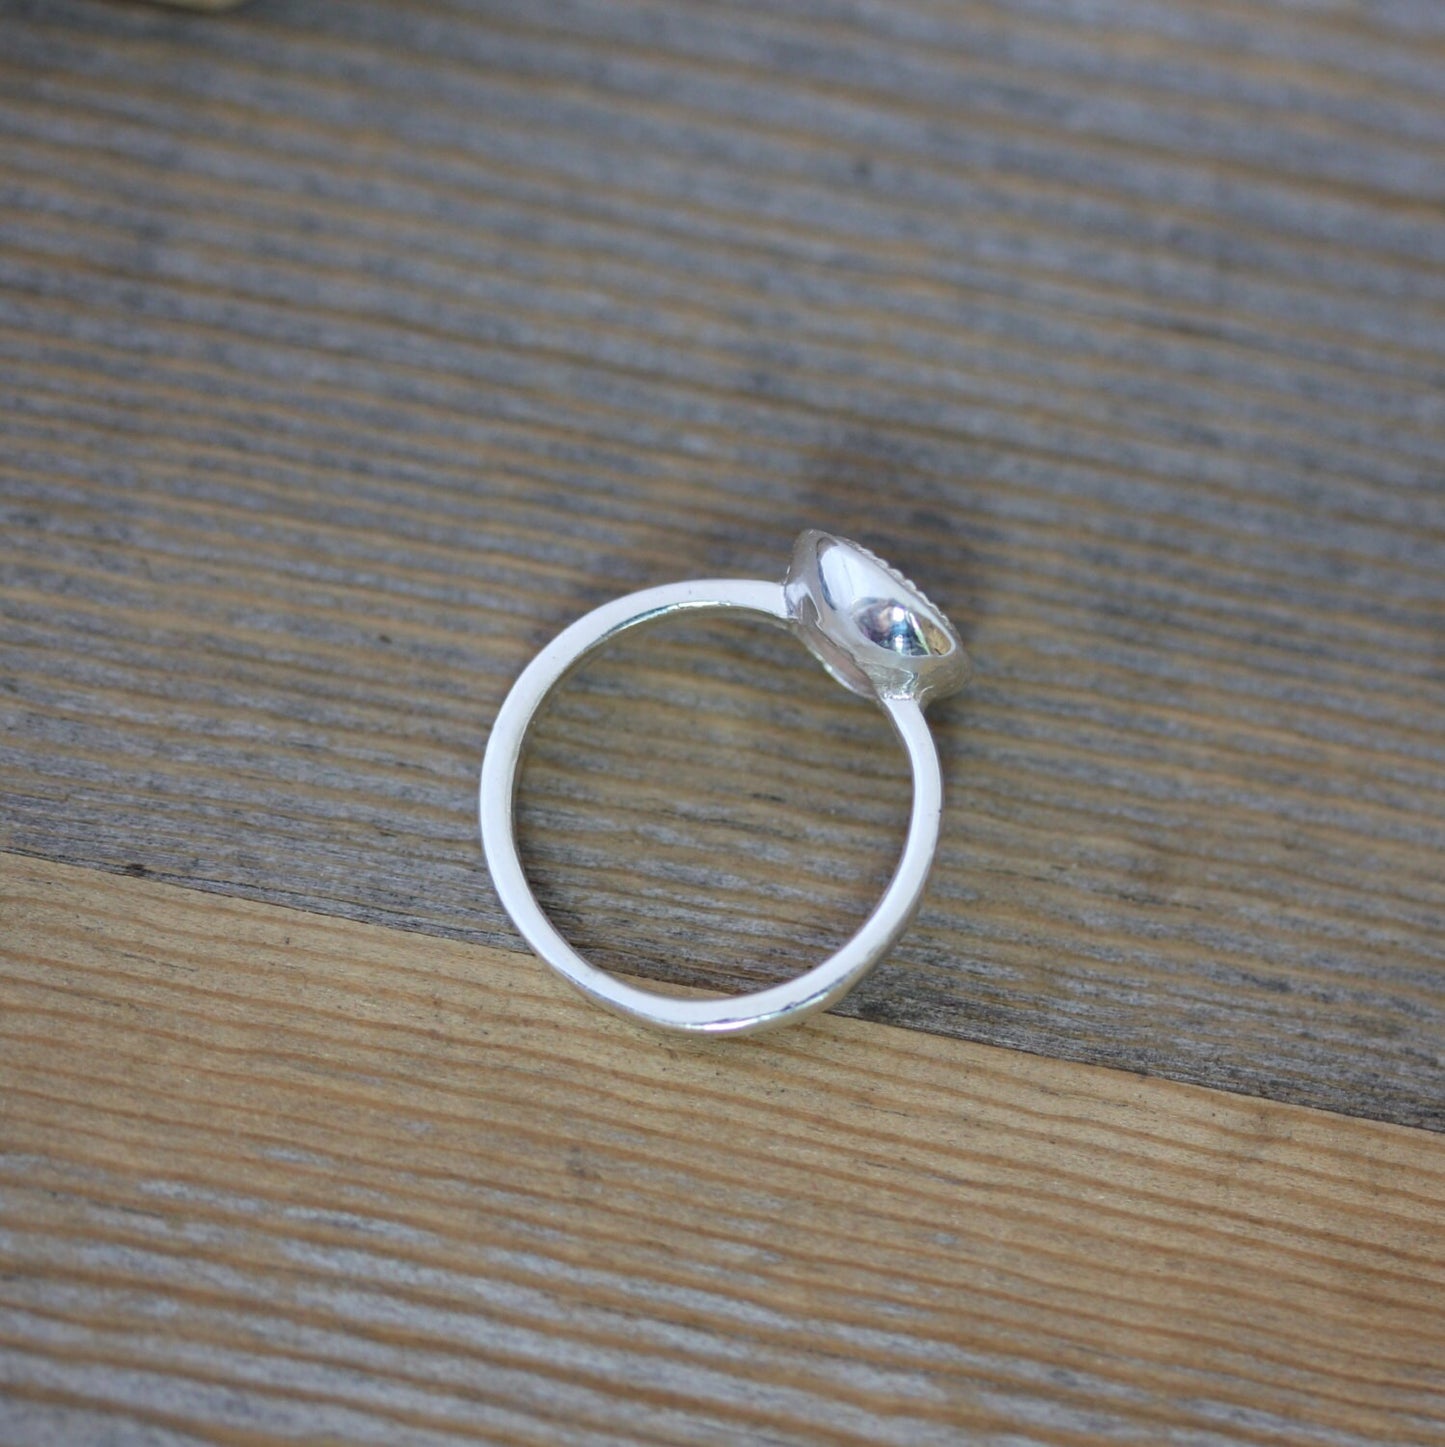 A handmade Oregon Sunstone ring in sterling silver on a wooden table.